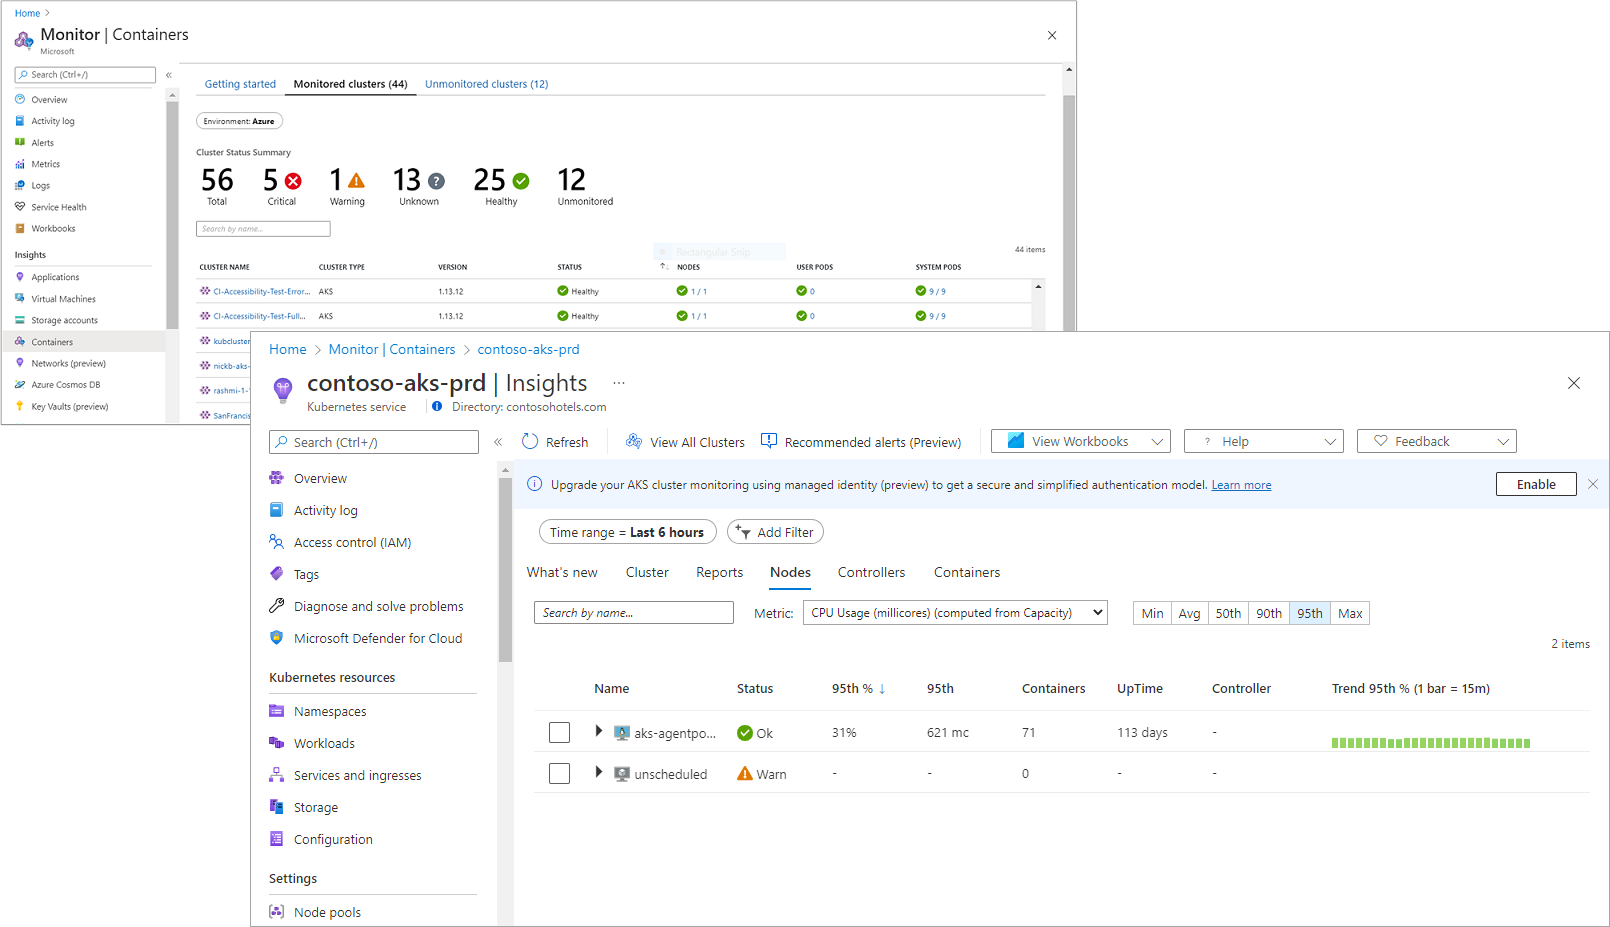 Screenshot that shows an overview of methods to access Container insights.